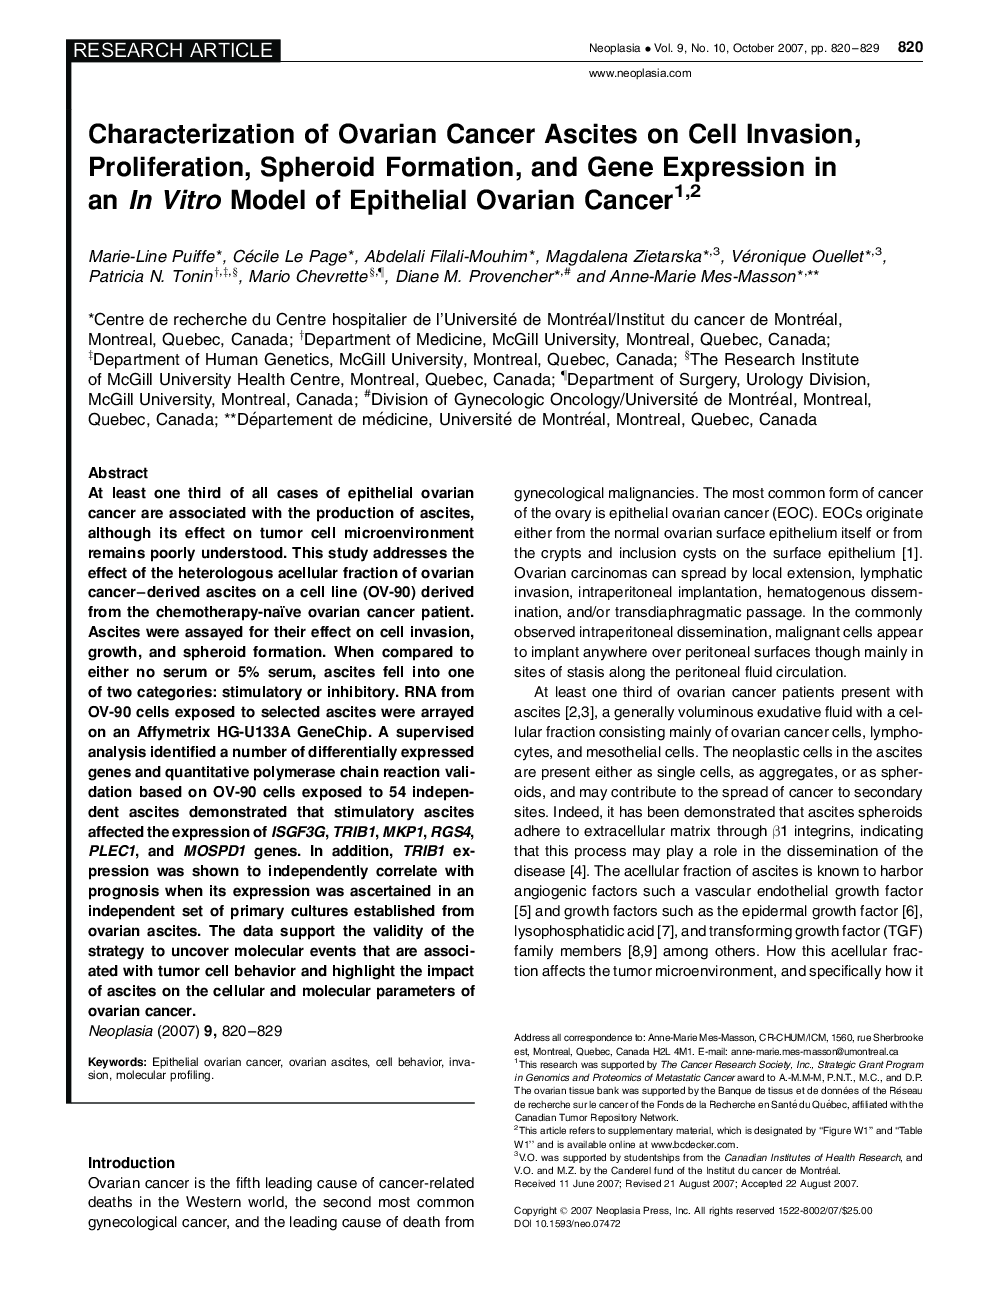 Characterization of Ovarian Cancer Ascites on Cell Invasion, Proliferation, Spheroid Formation, Gene Expression in an In Vitro Model of Epithelial Ovarian Cancer